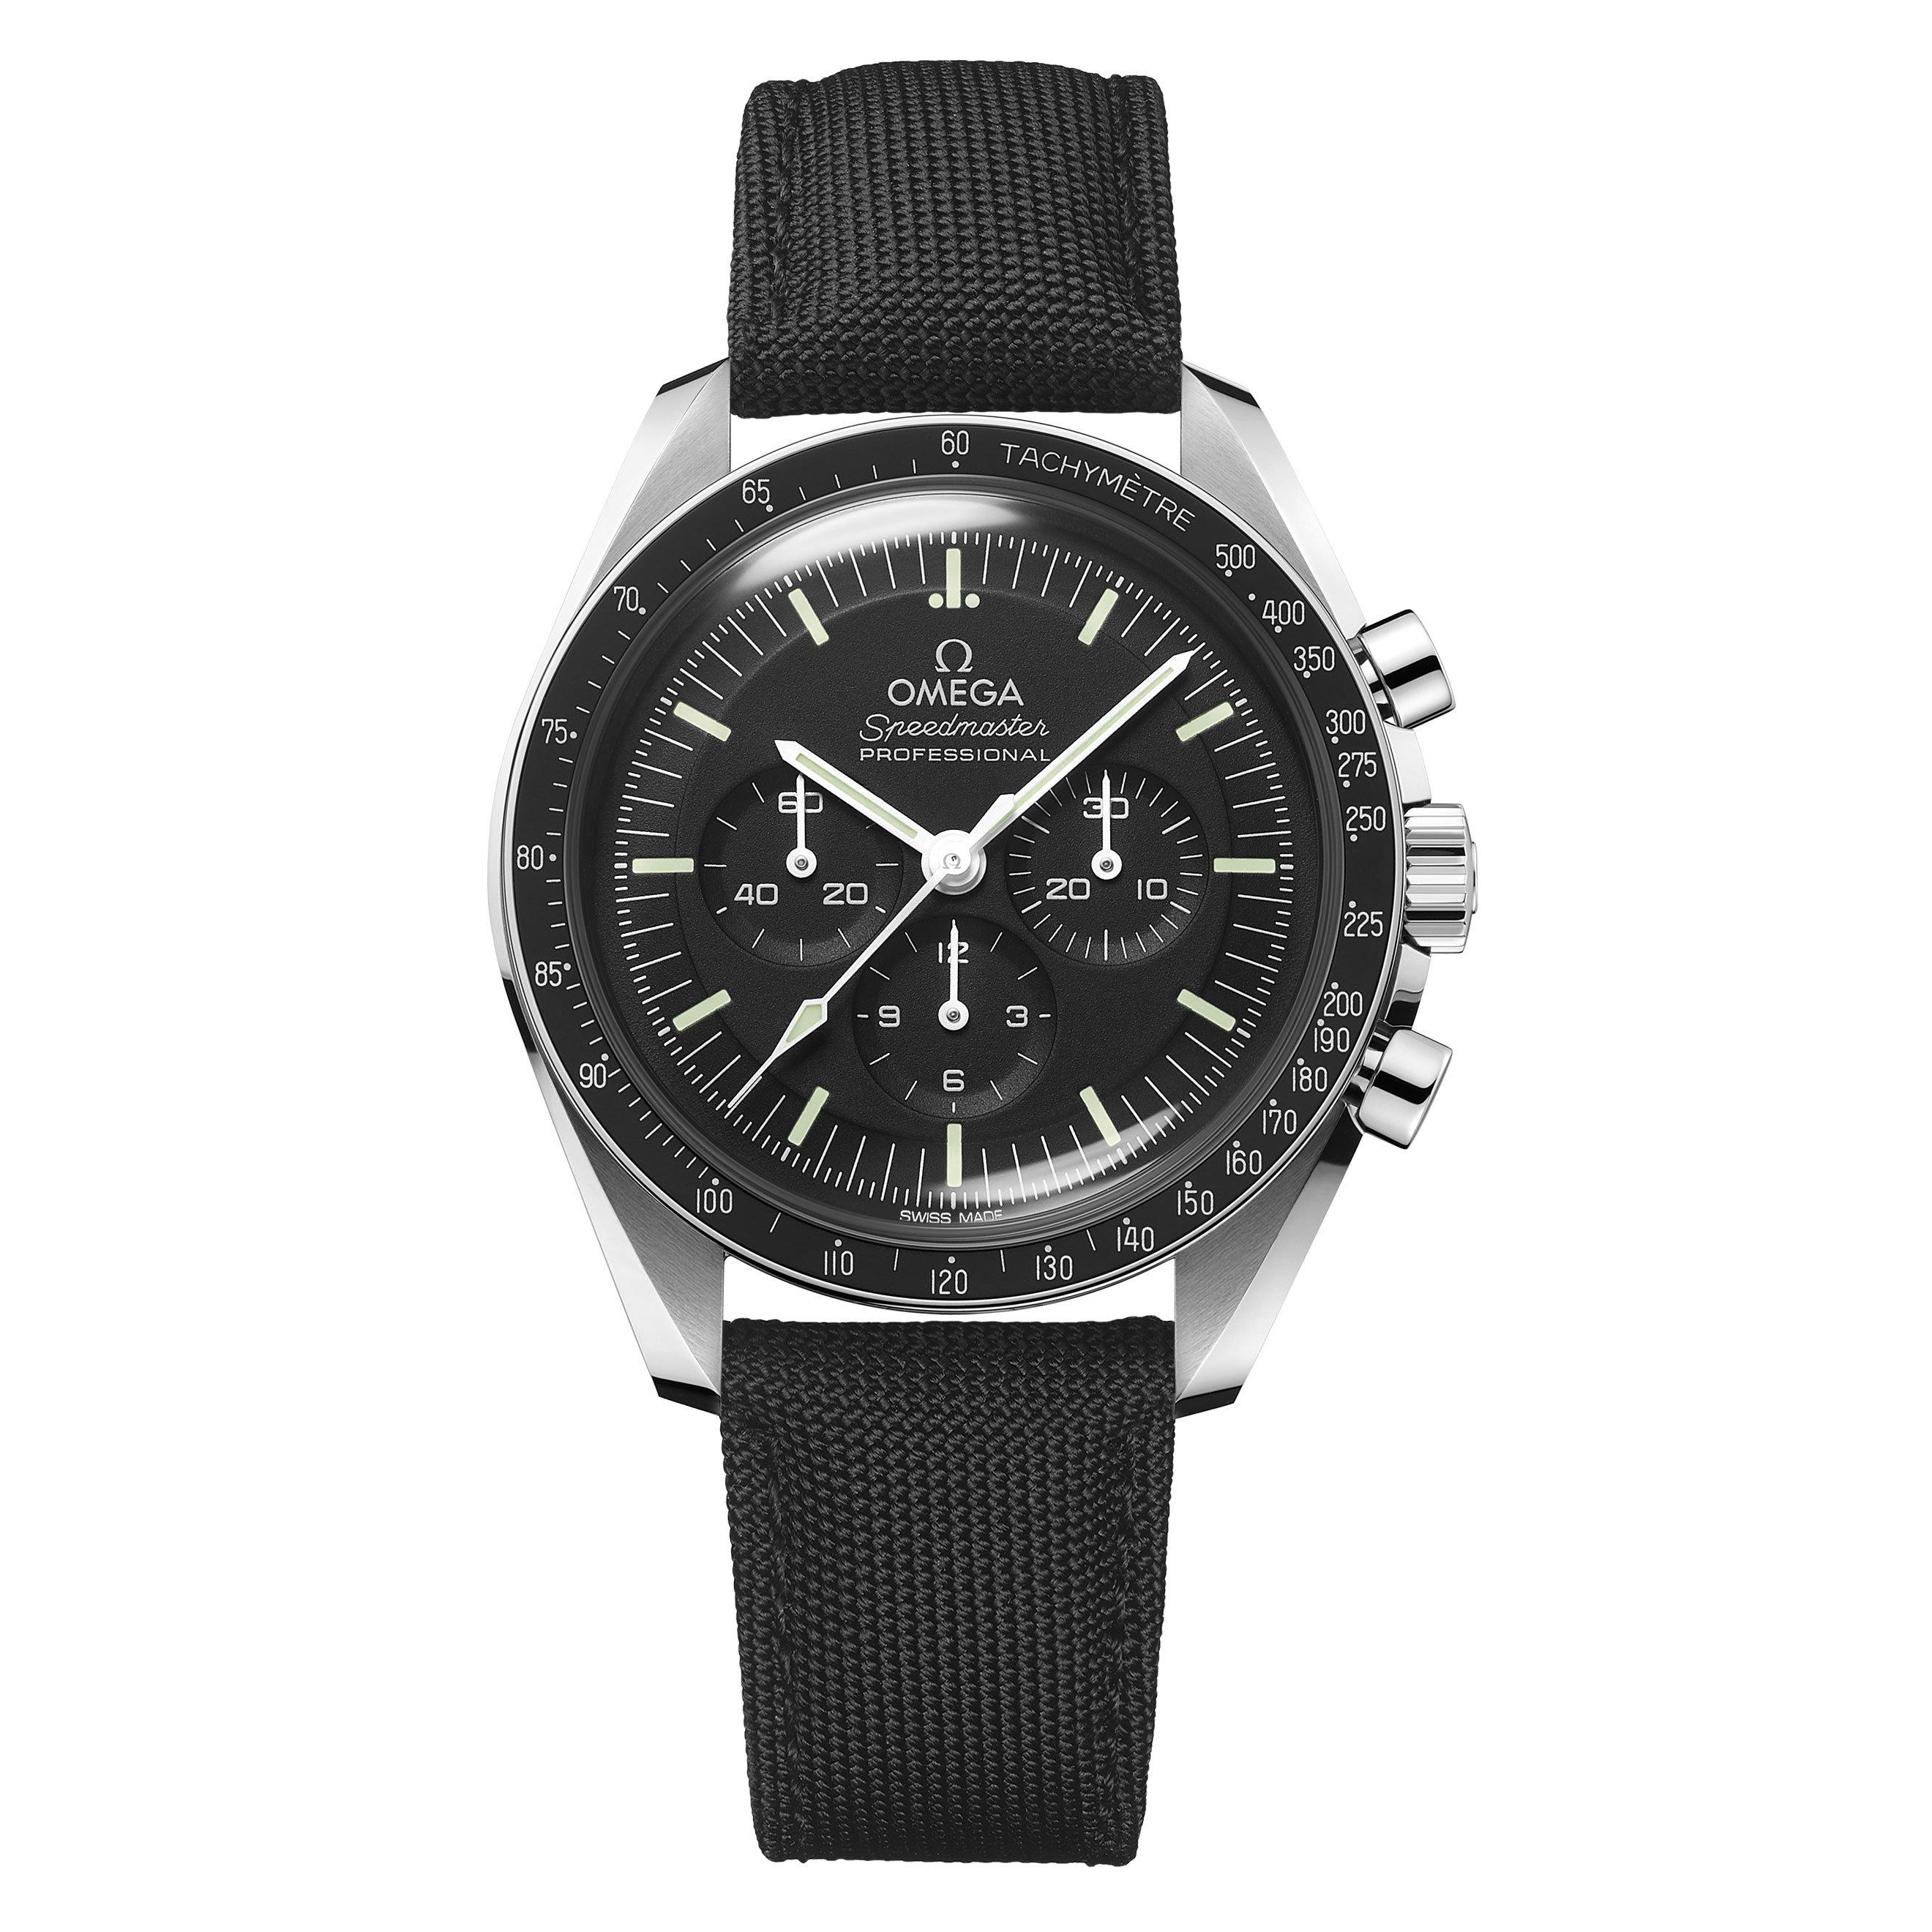 OMEGA Speedmaster Moonwatch Professional Co-Axial Master Chronometer Chronograph Men's Watch